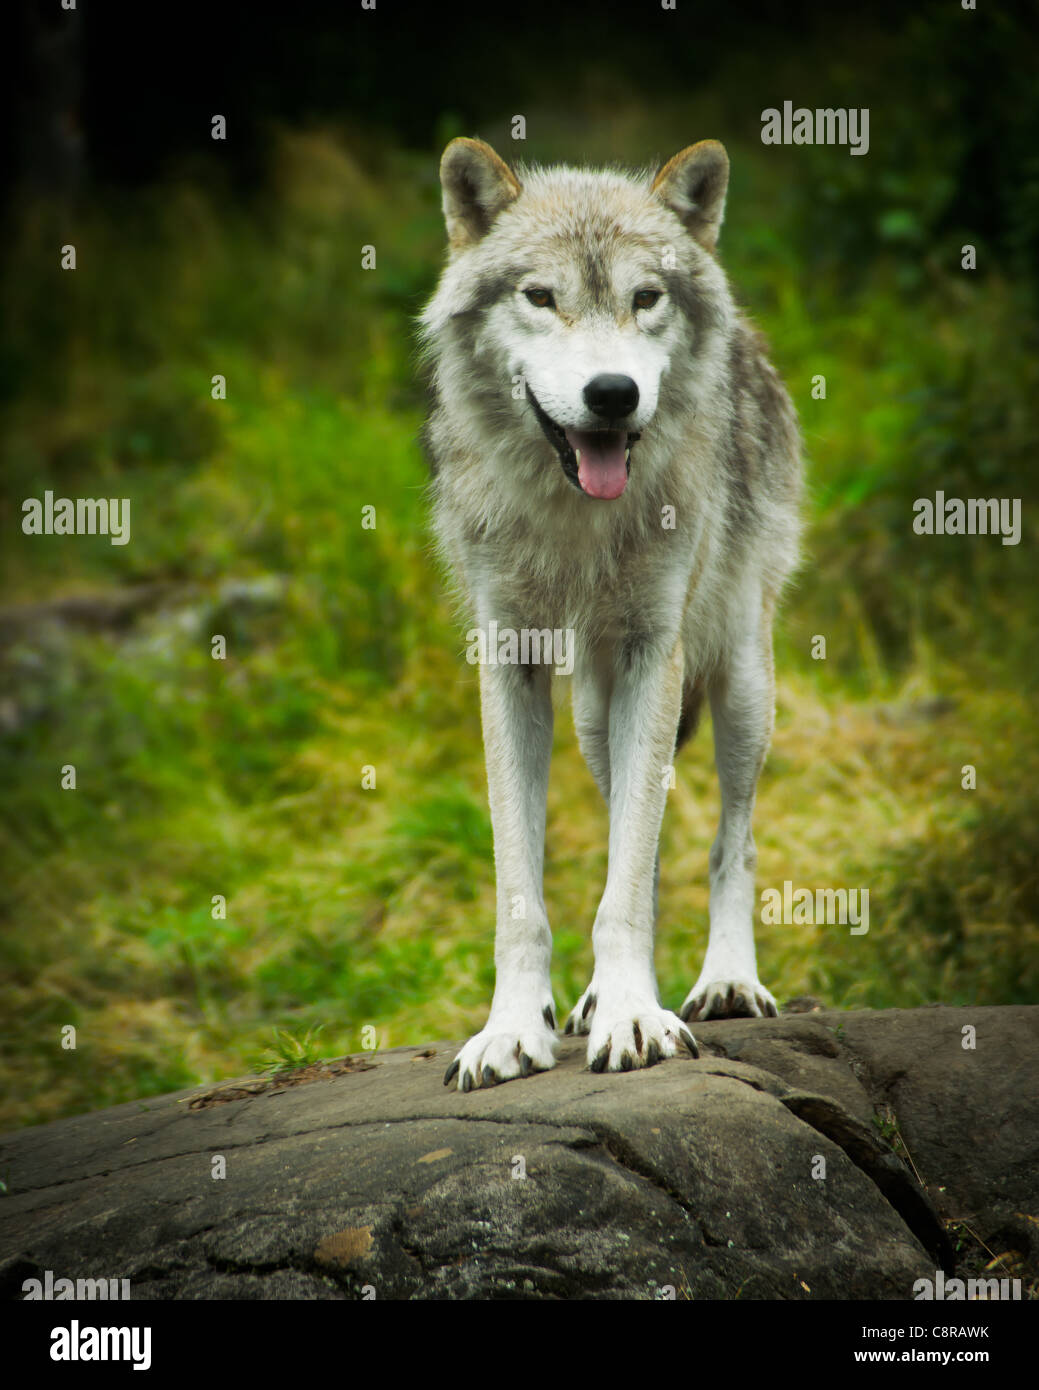 Close image of a wild, Eastern Gray Timber Wolf (Canis lupus) Standing atop a large stone ledge. Stock Photo